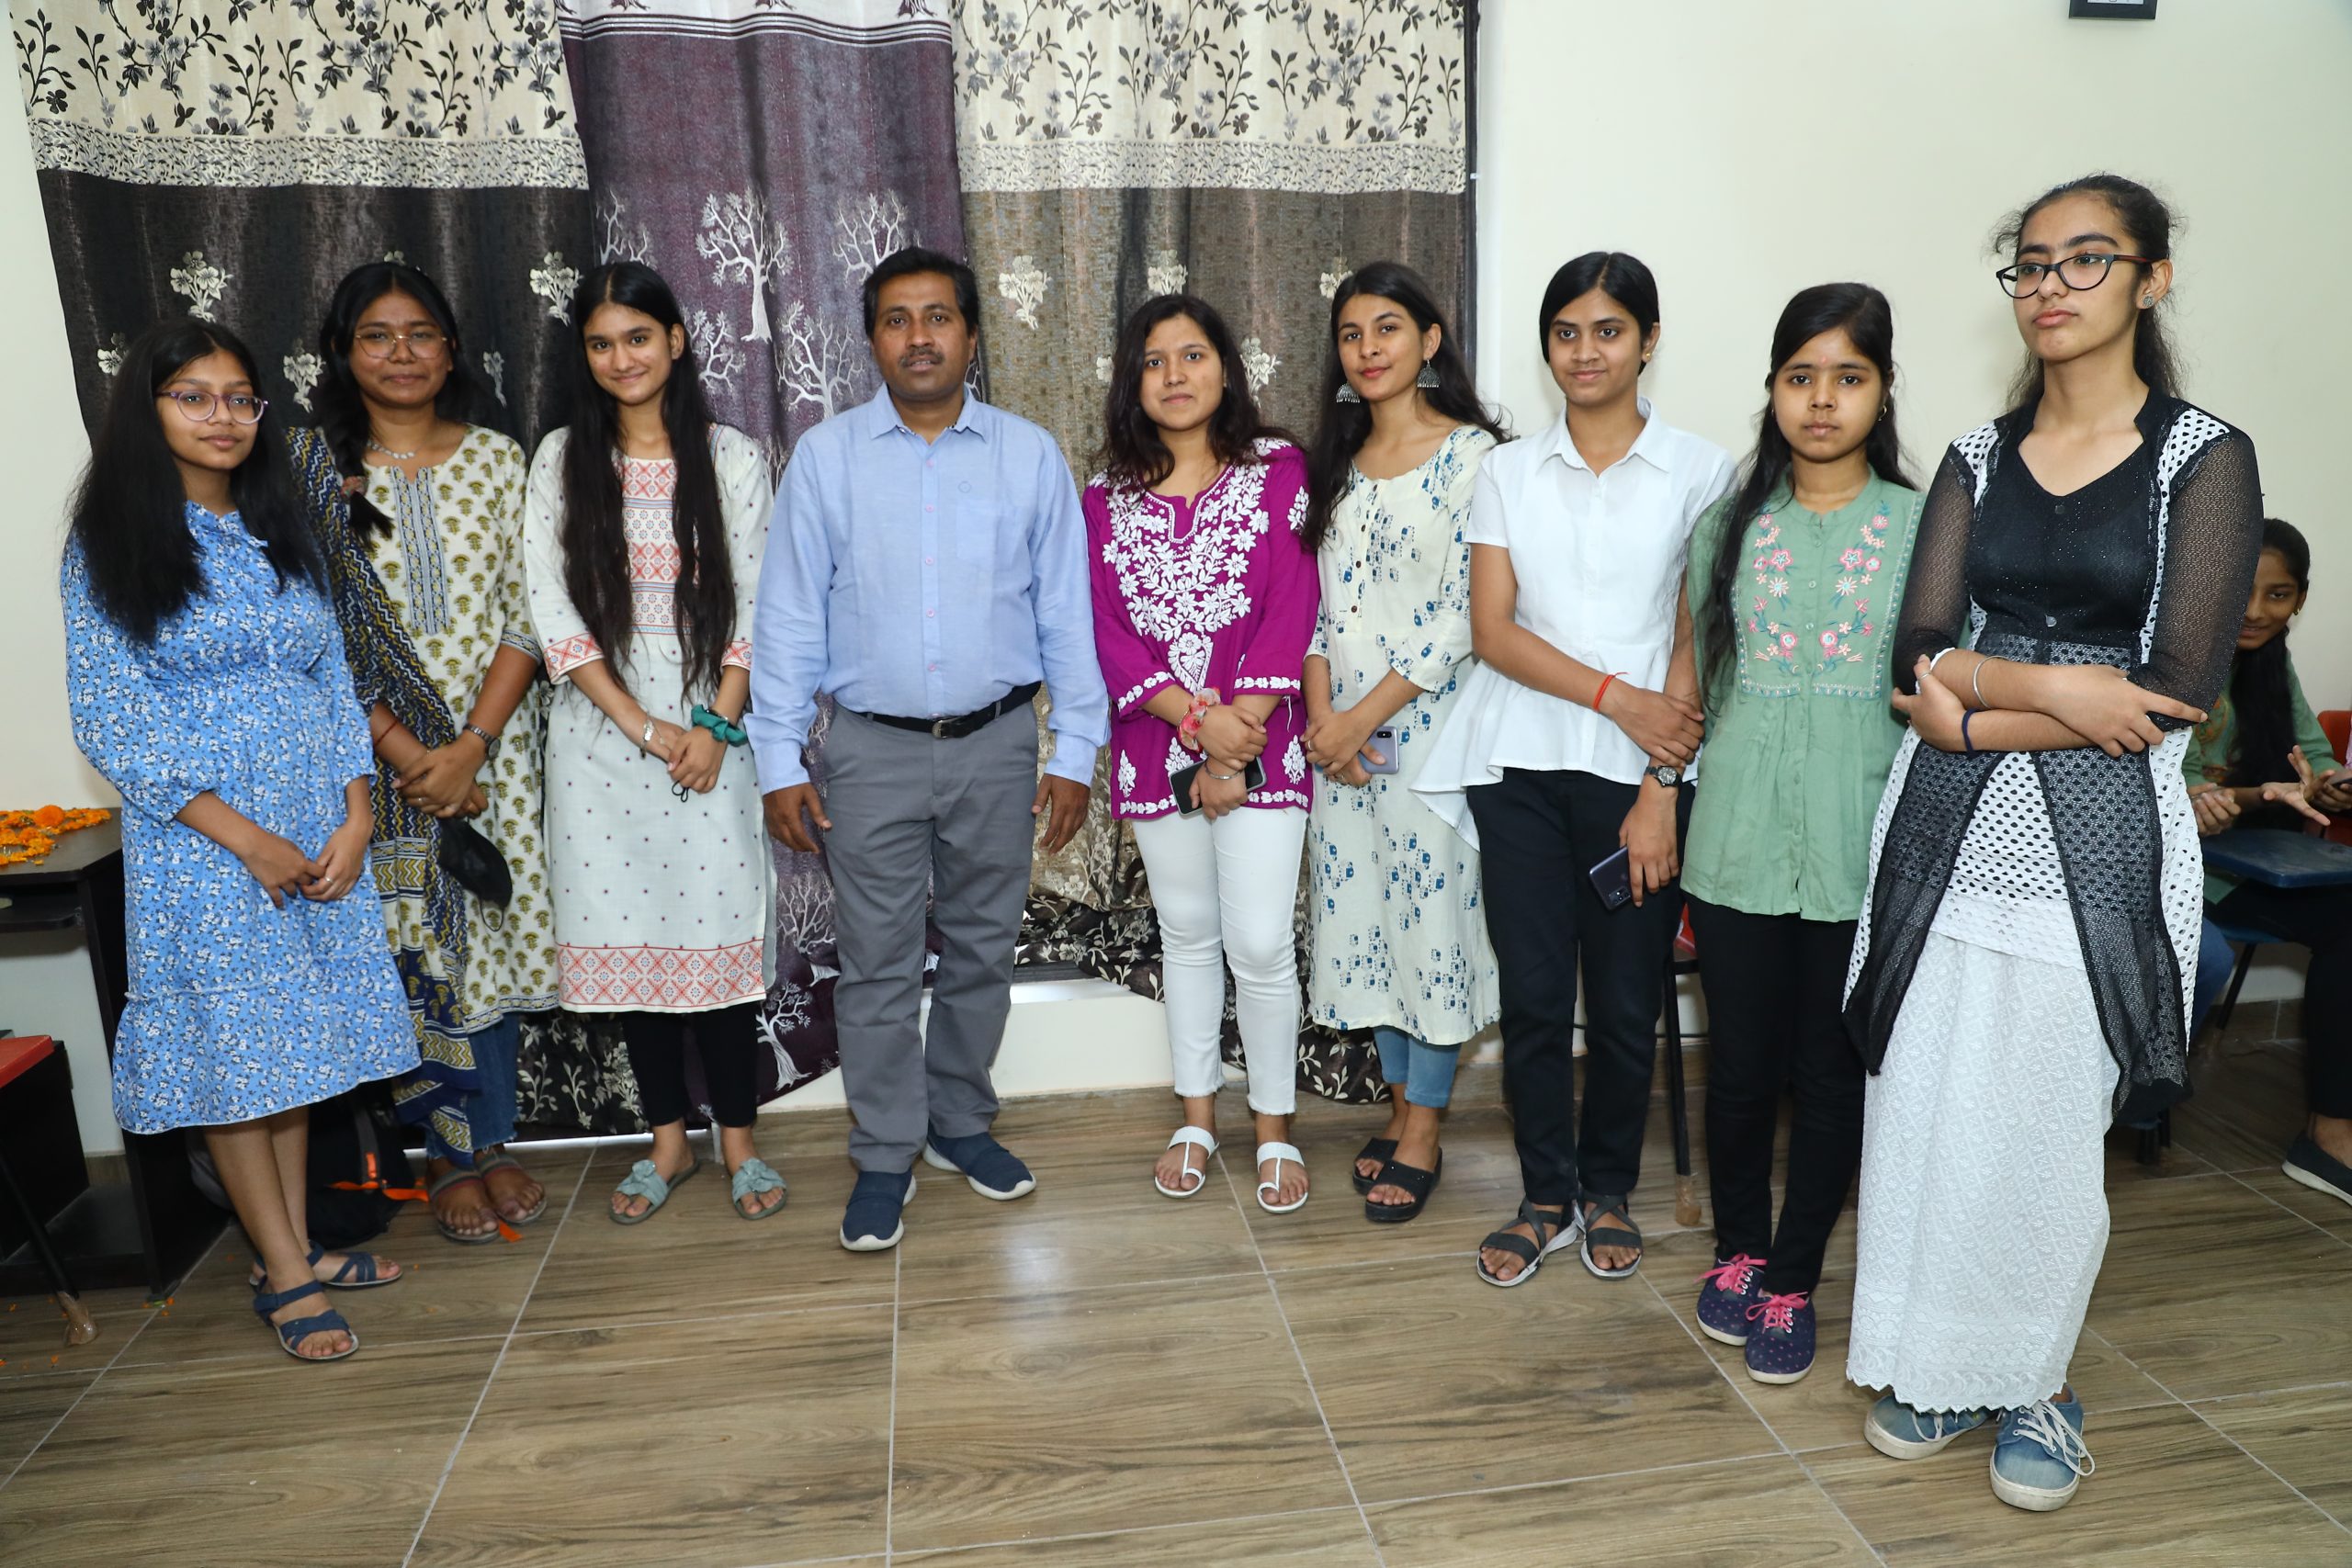 Shrivastava classes Faculty with his students in class- 25th Anniversary Celebration